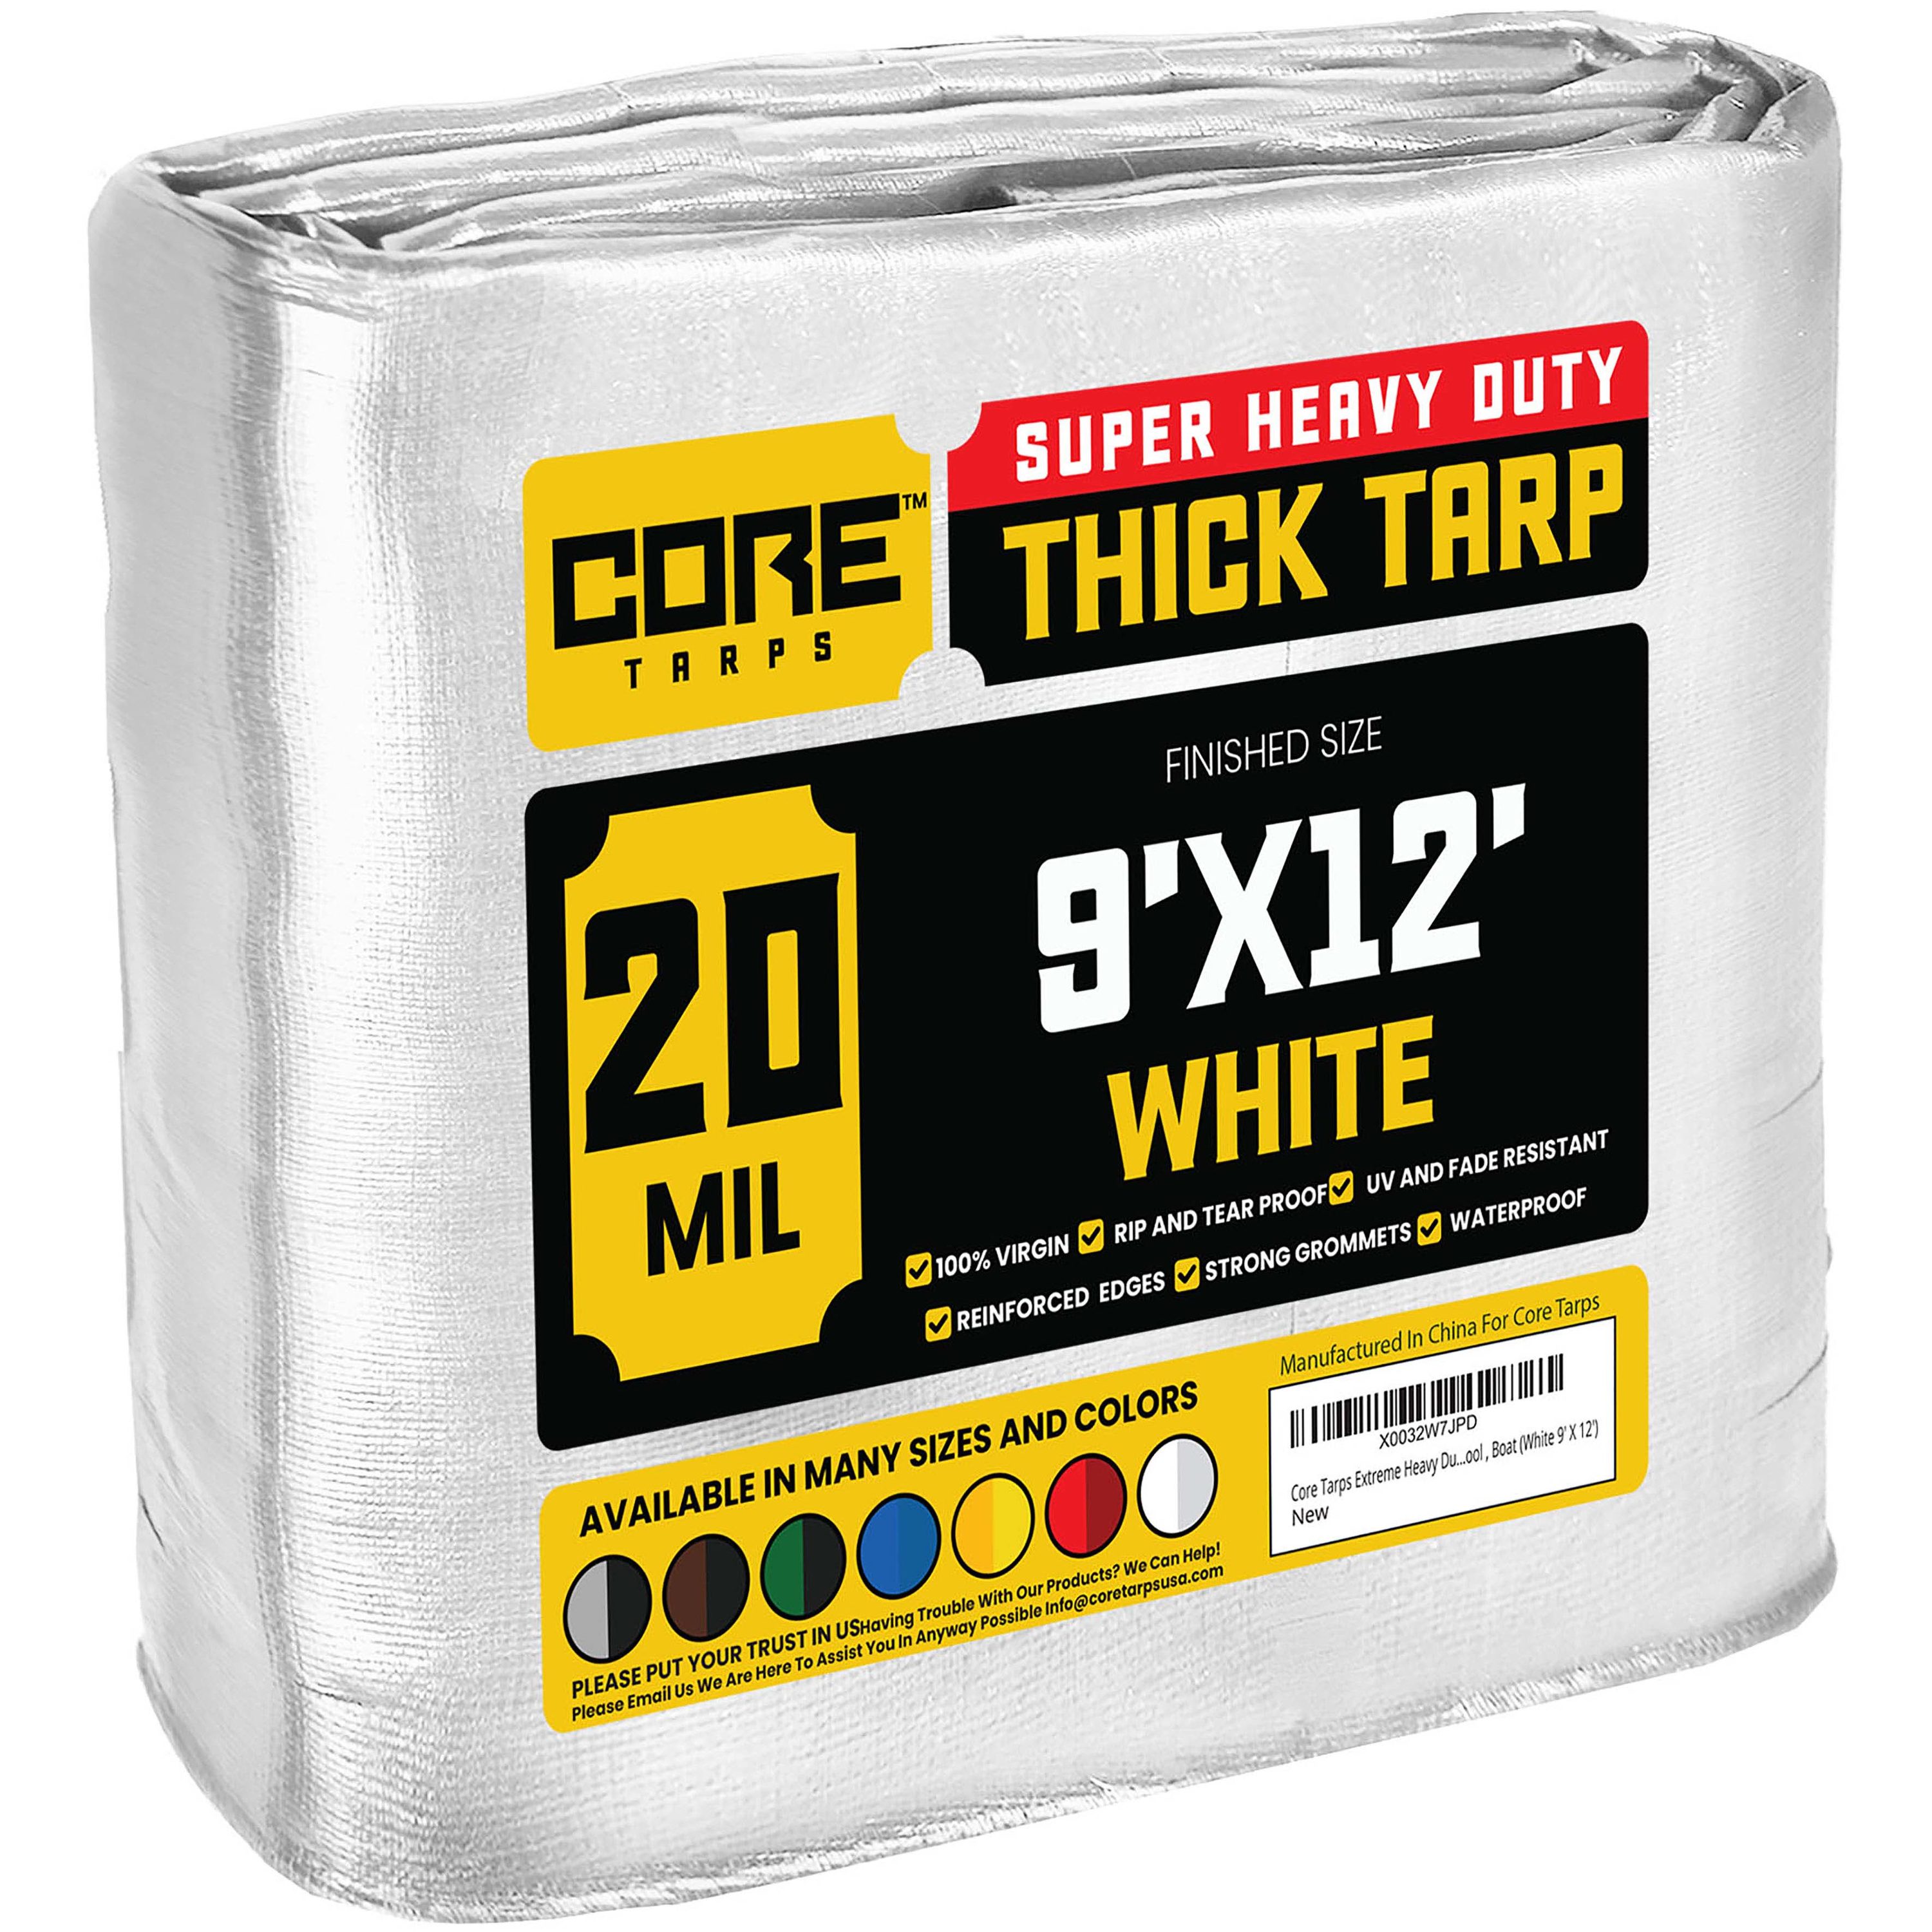  2 Packs(100 Count Total) Code K 9-12 Gallon Heavy Duty